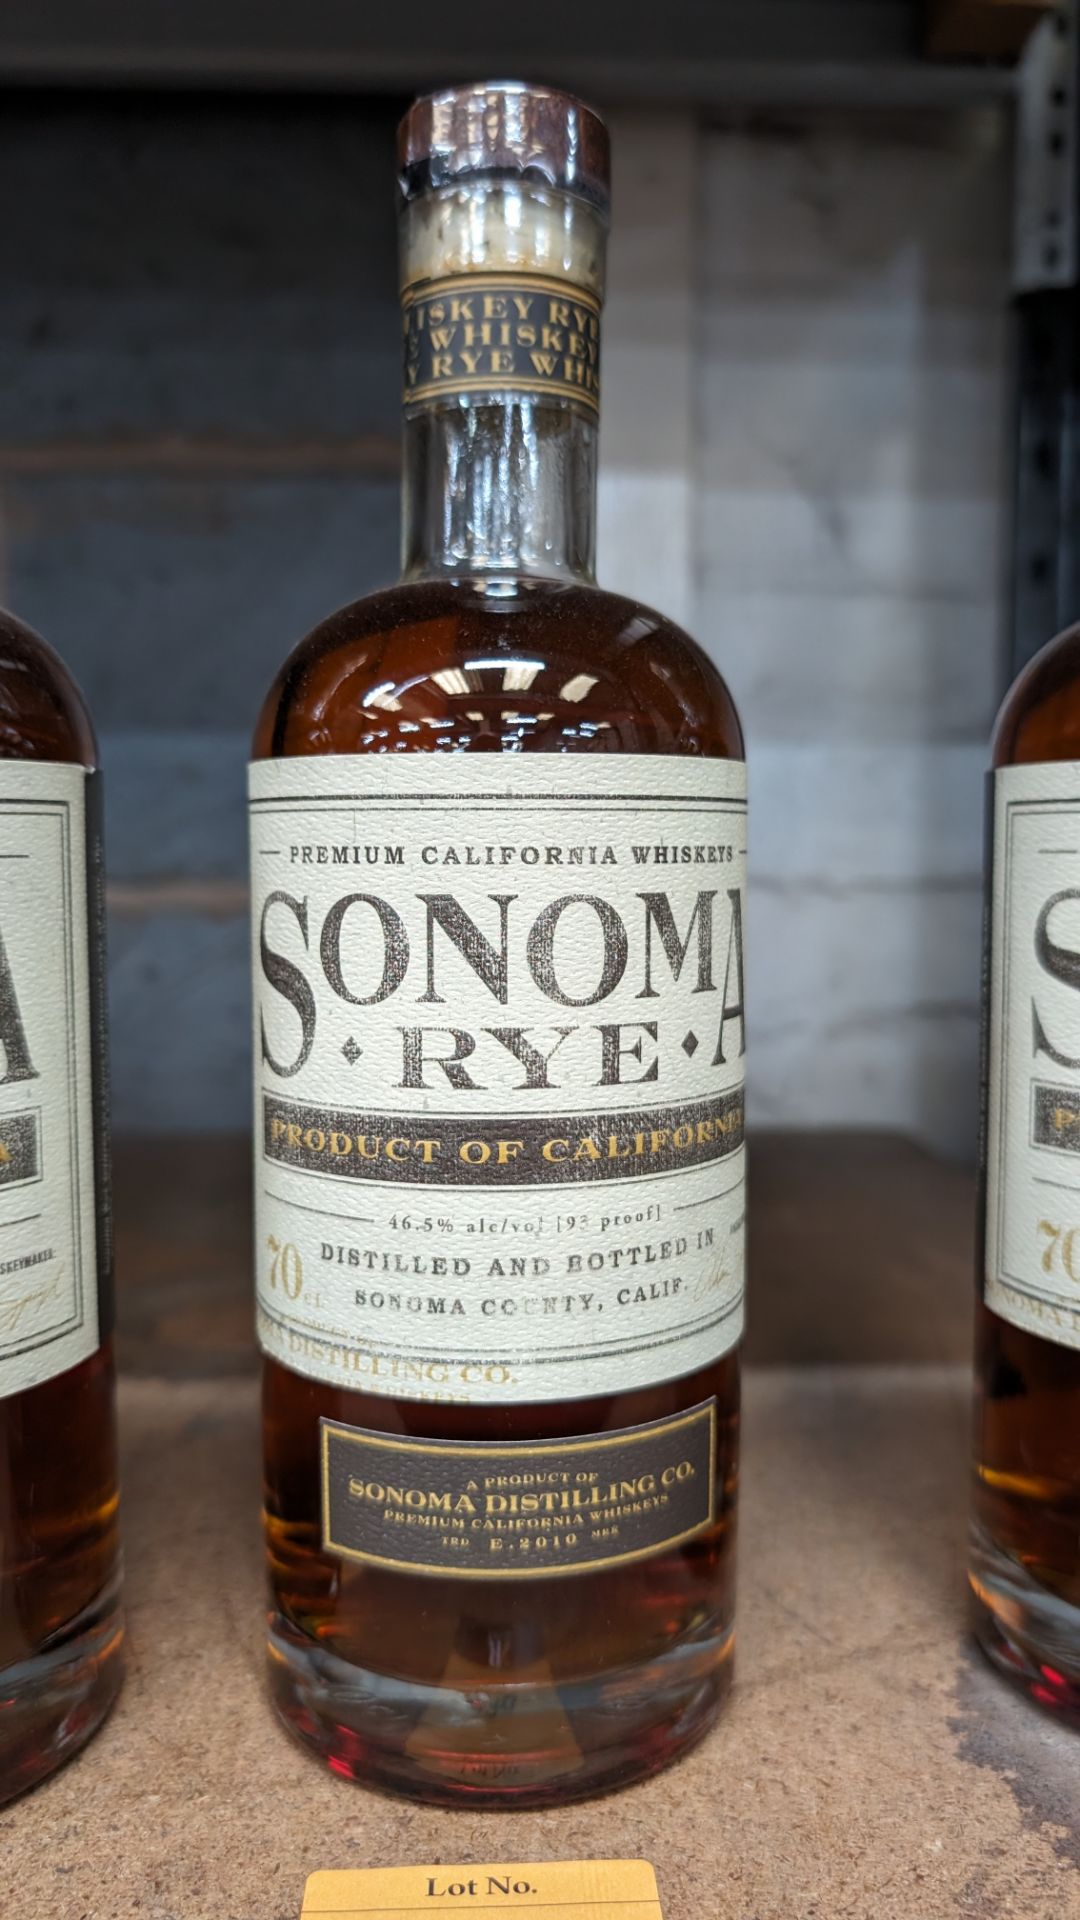 1 off 700ml bottle of Sonoma Rye Whiskey. 46.5% alc/vol (93 proof). Distilled and bottled in Sonom - Image 2 of 5